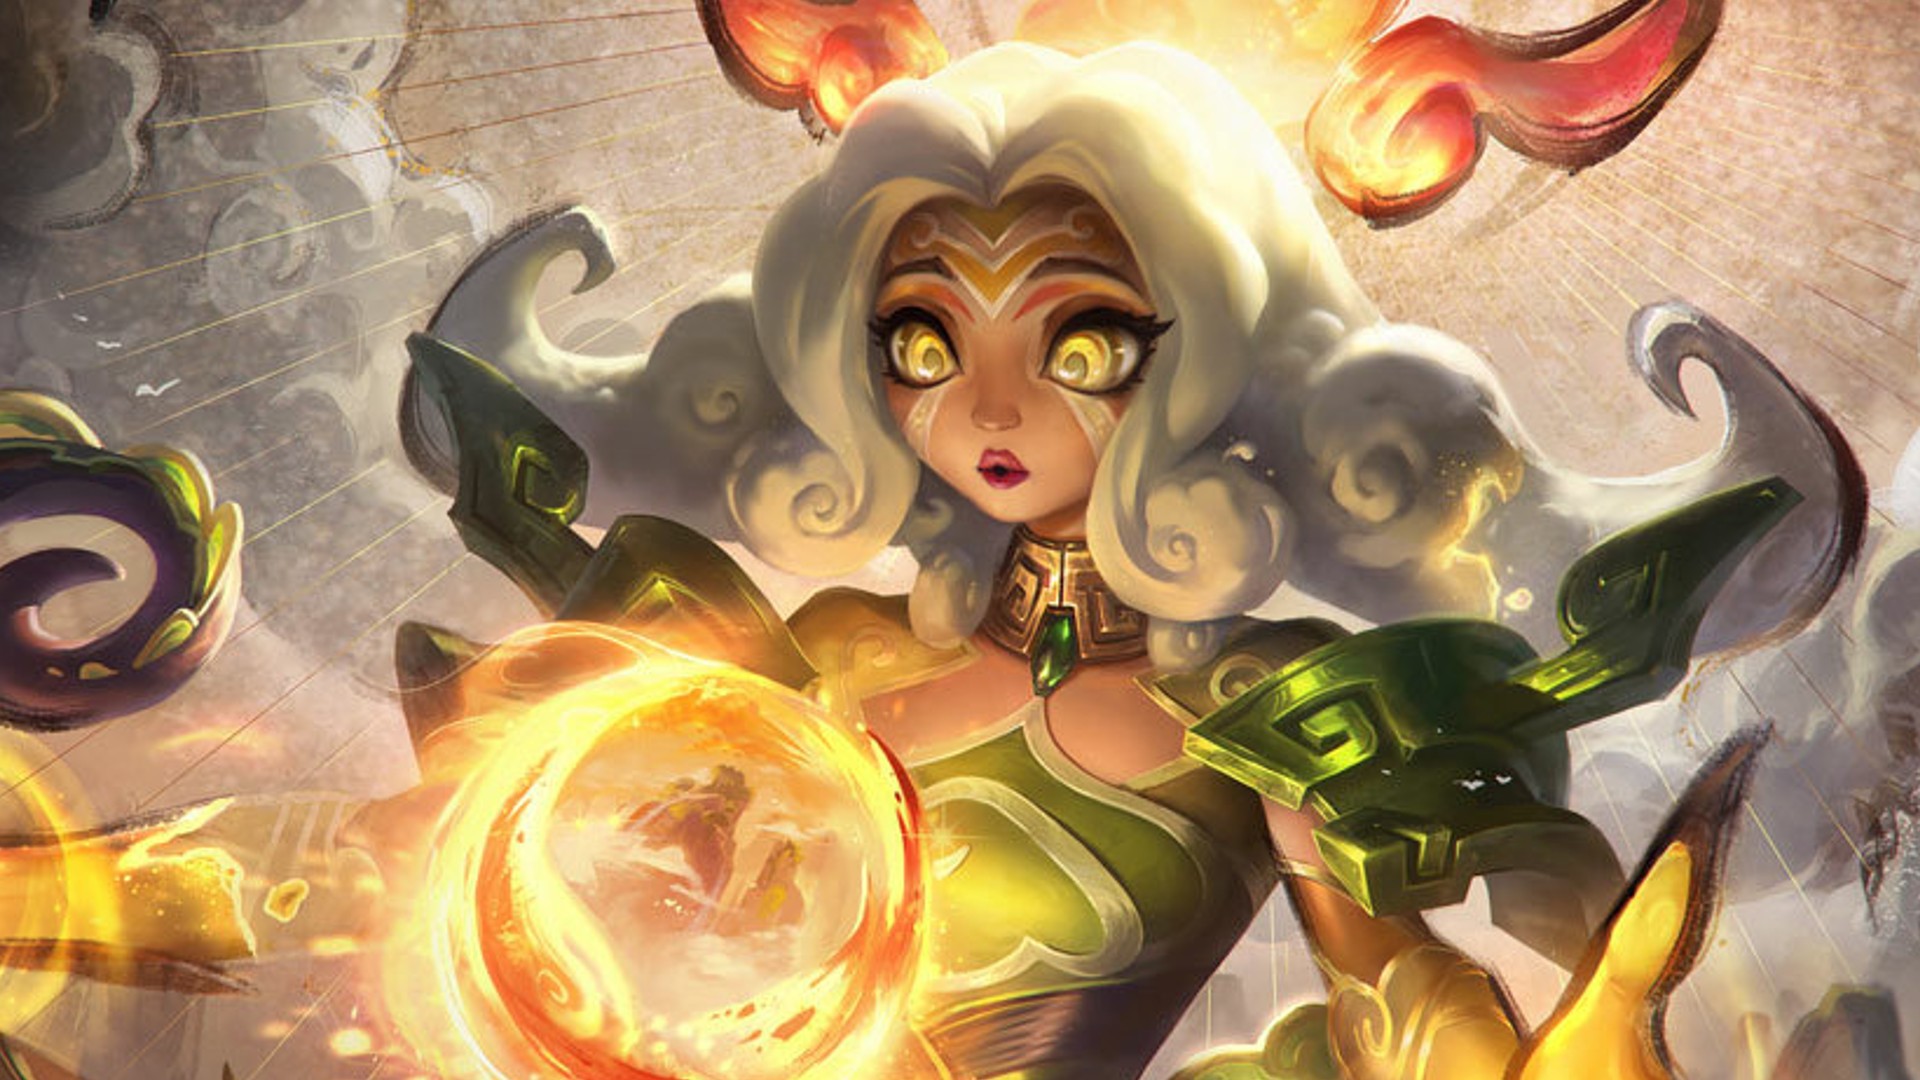 LoL is winning the MOBA battle thanks to its diverse roster